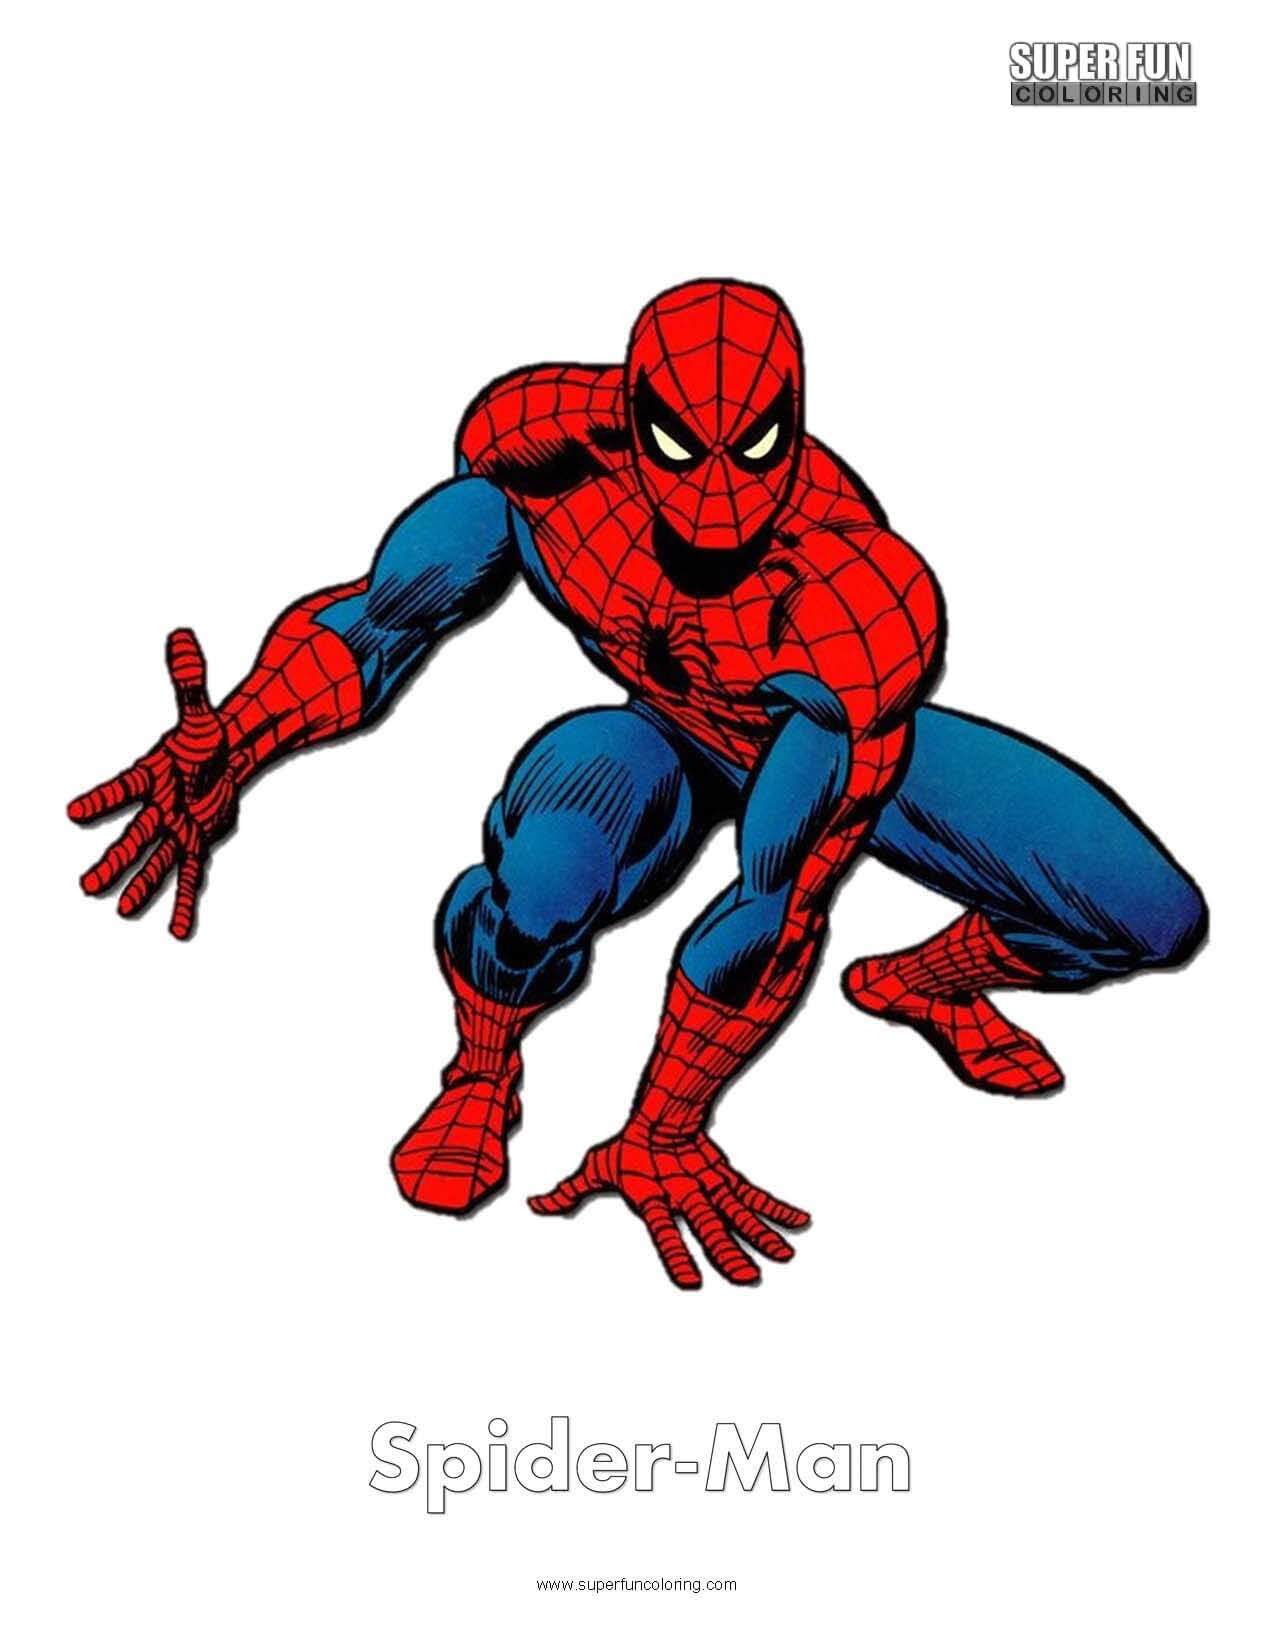 Spider-Man Coloring Page